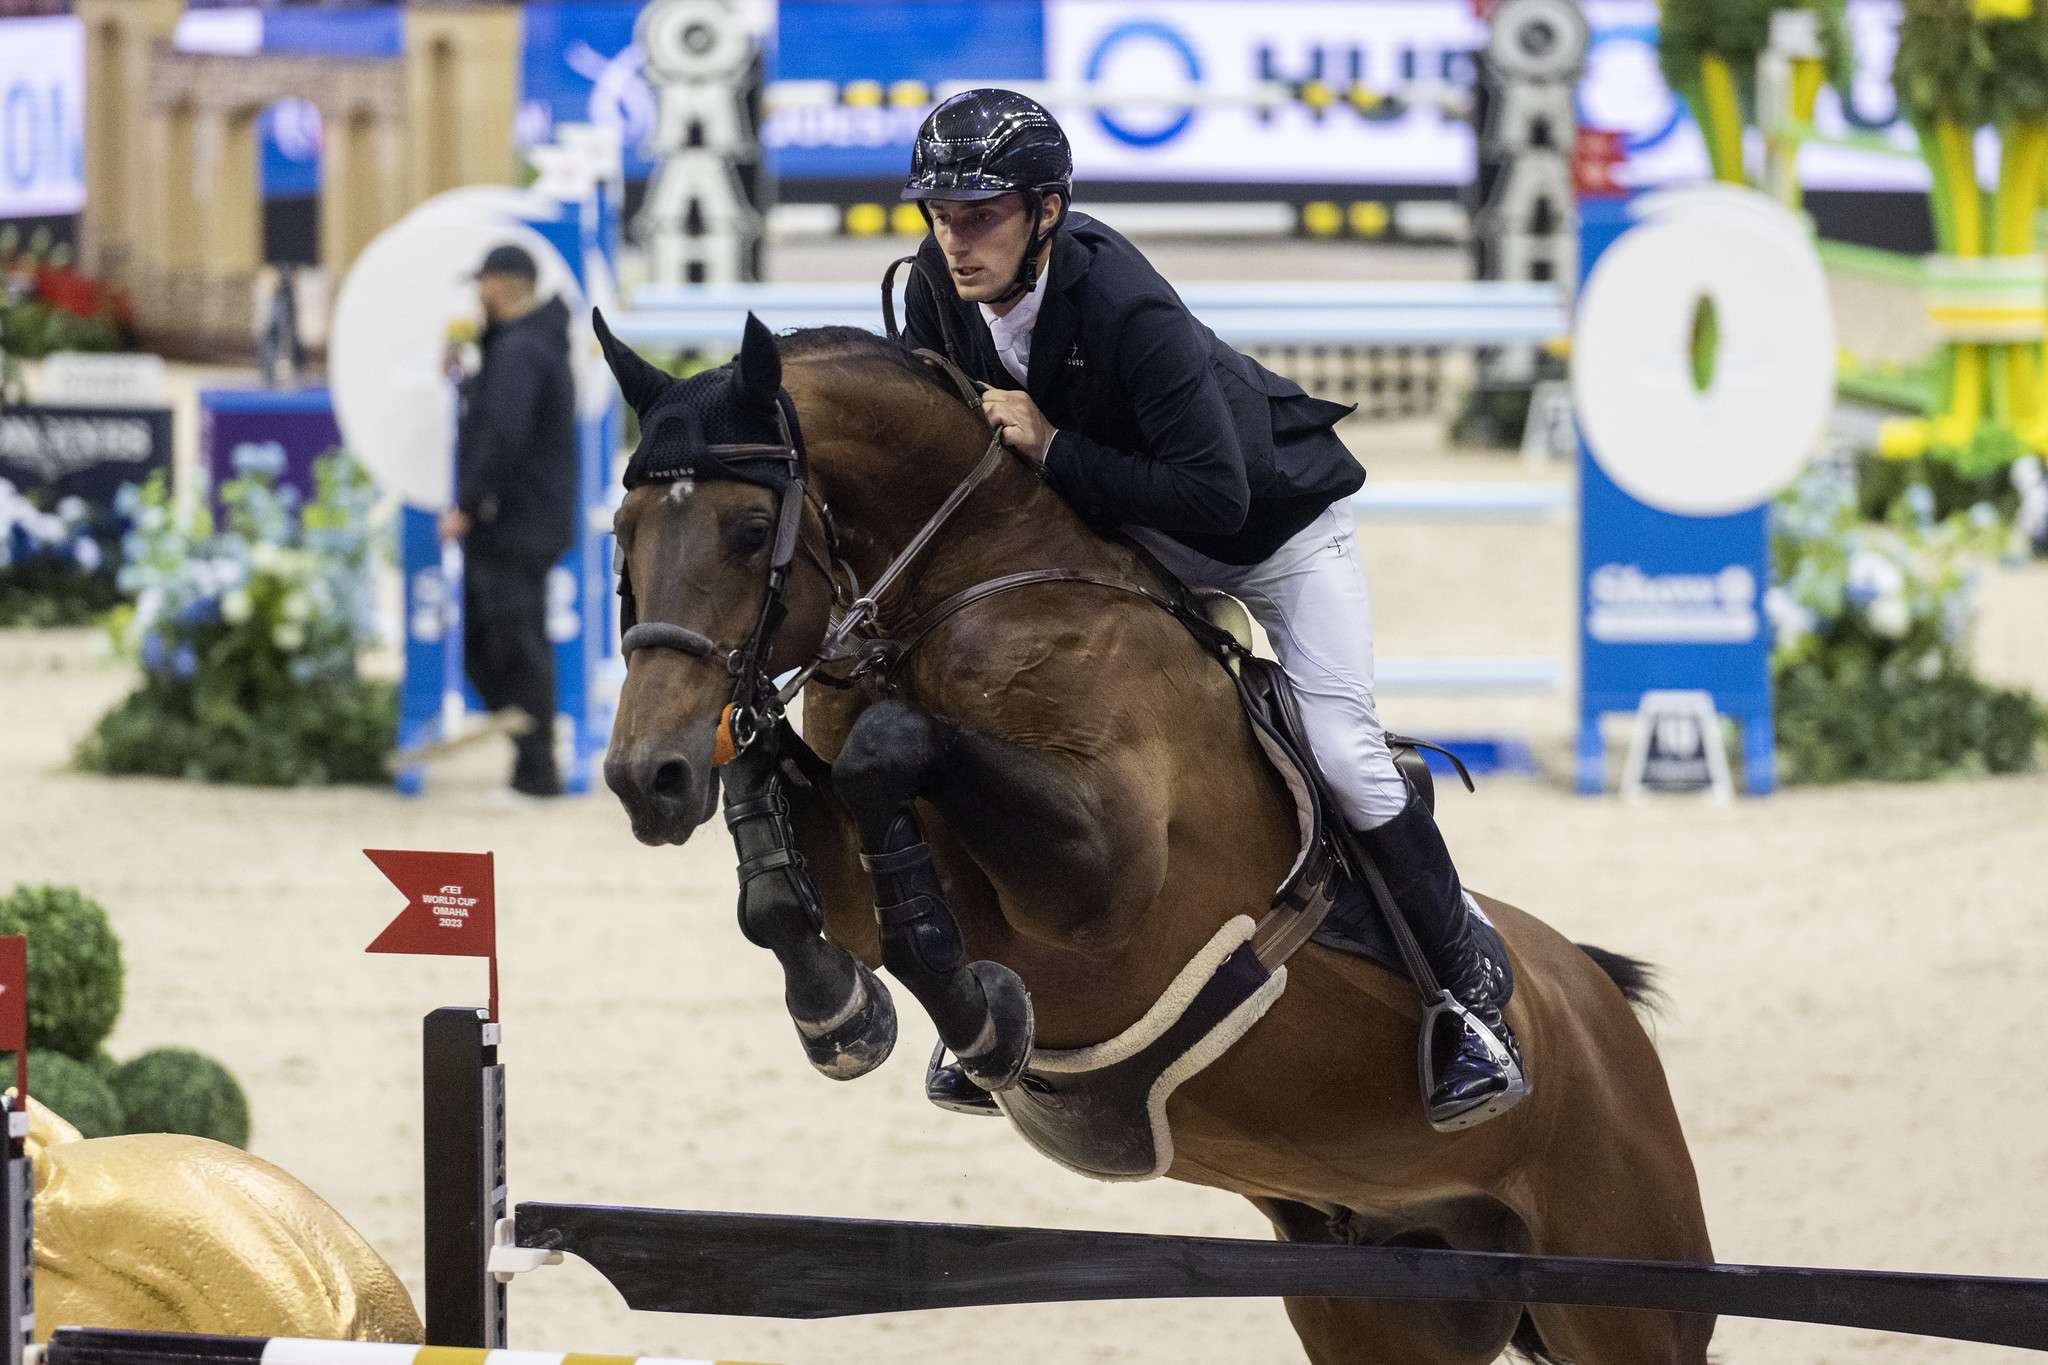 Richard Vogel (GER) and United Touch S - winners of the Longines FEI Jumping World Cup™ Final - Omaha 2023. Final II Copyright ©FEI/Richard Juilliart